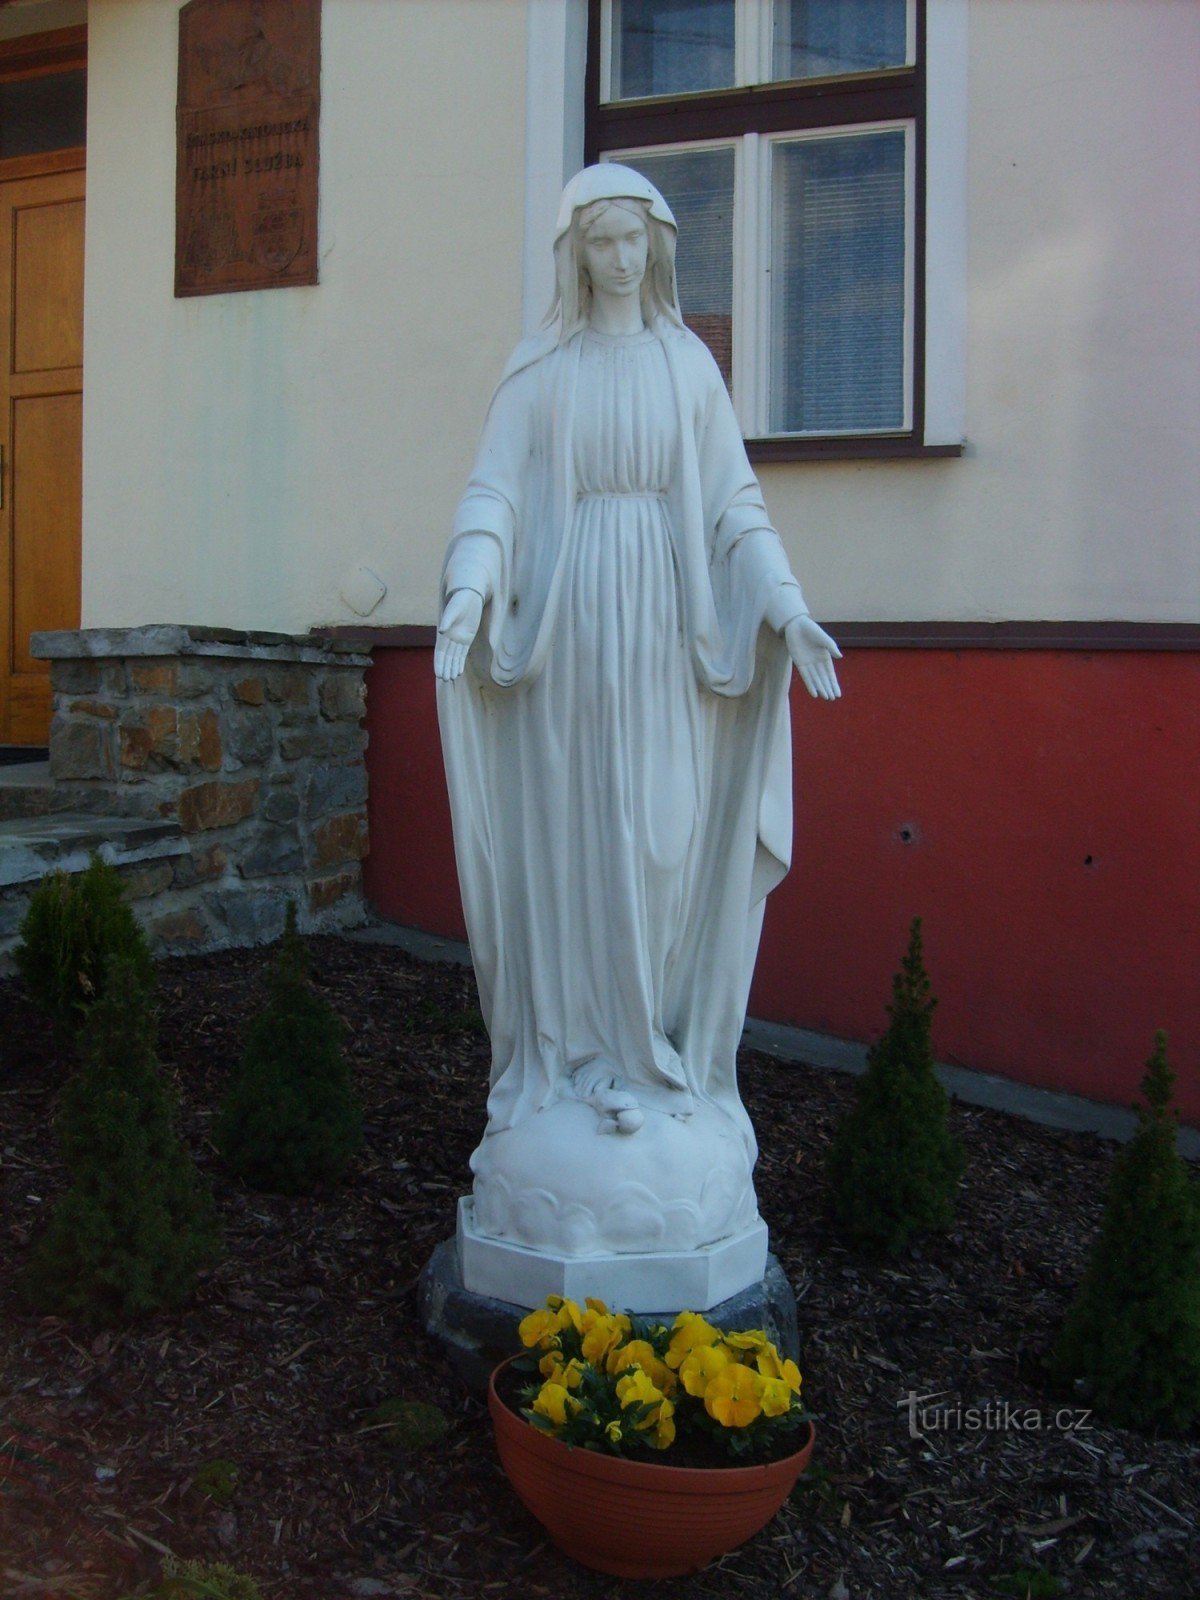 Statuette of the Virgin Mary